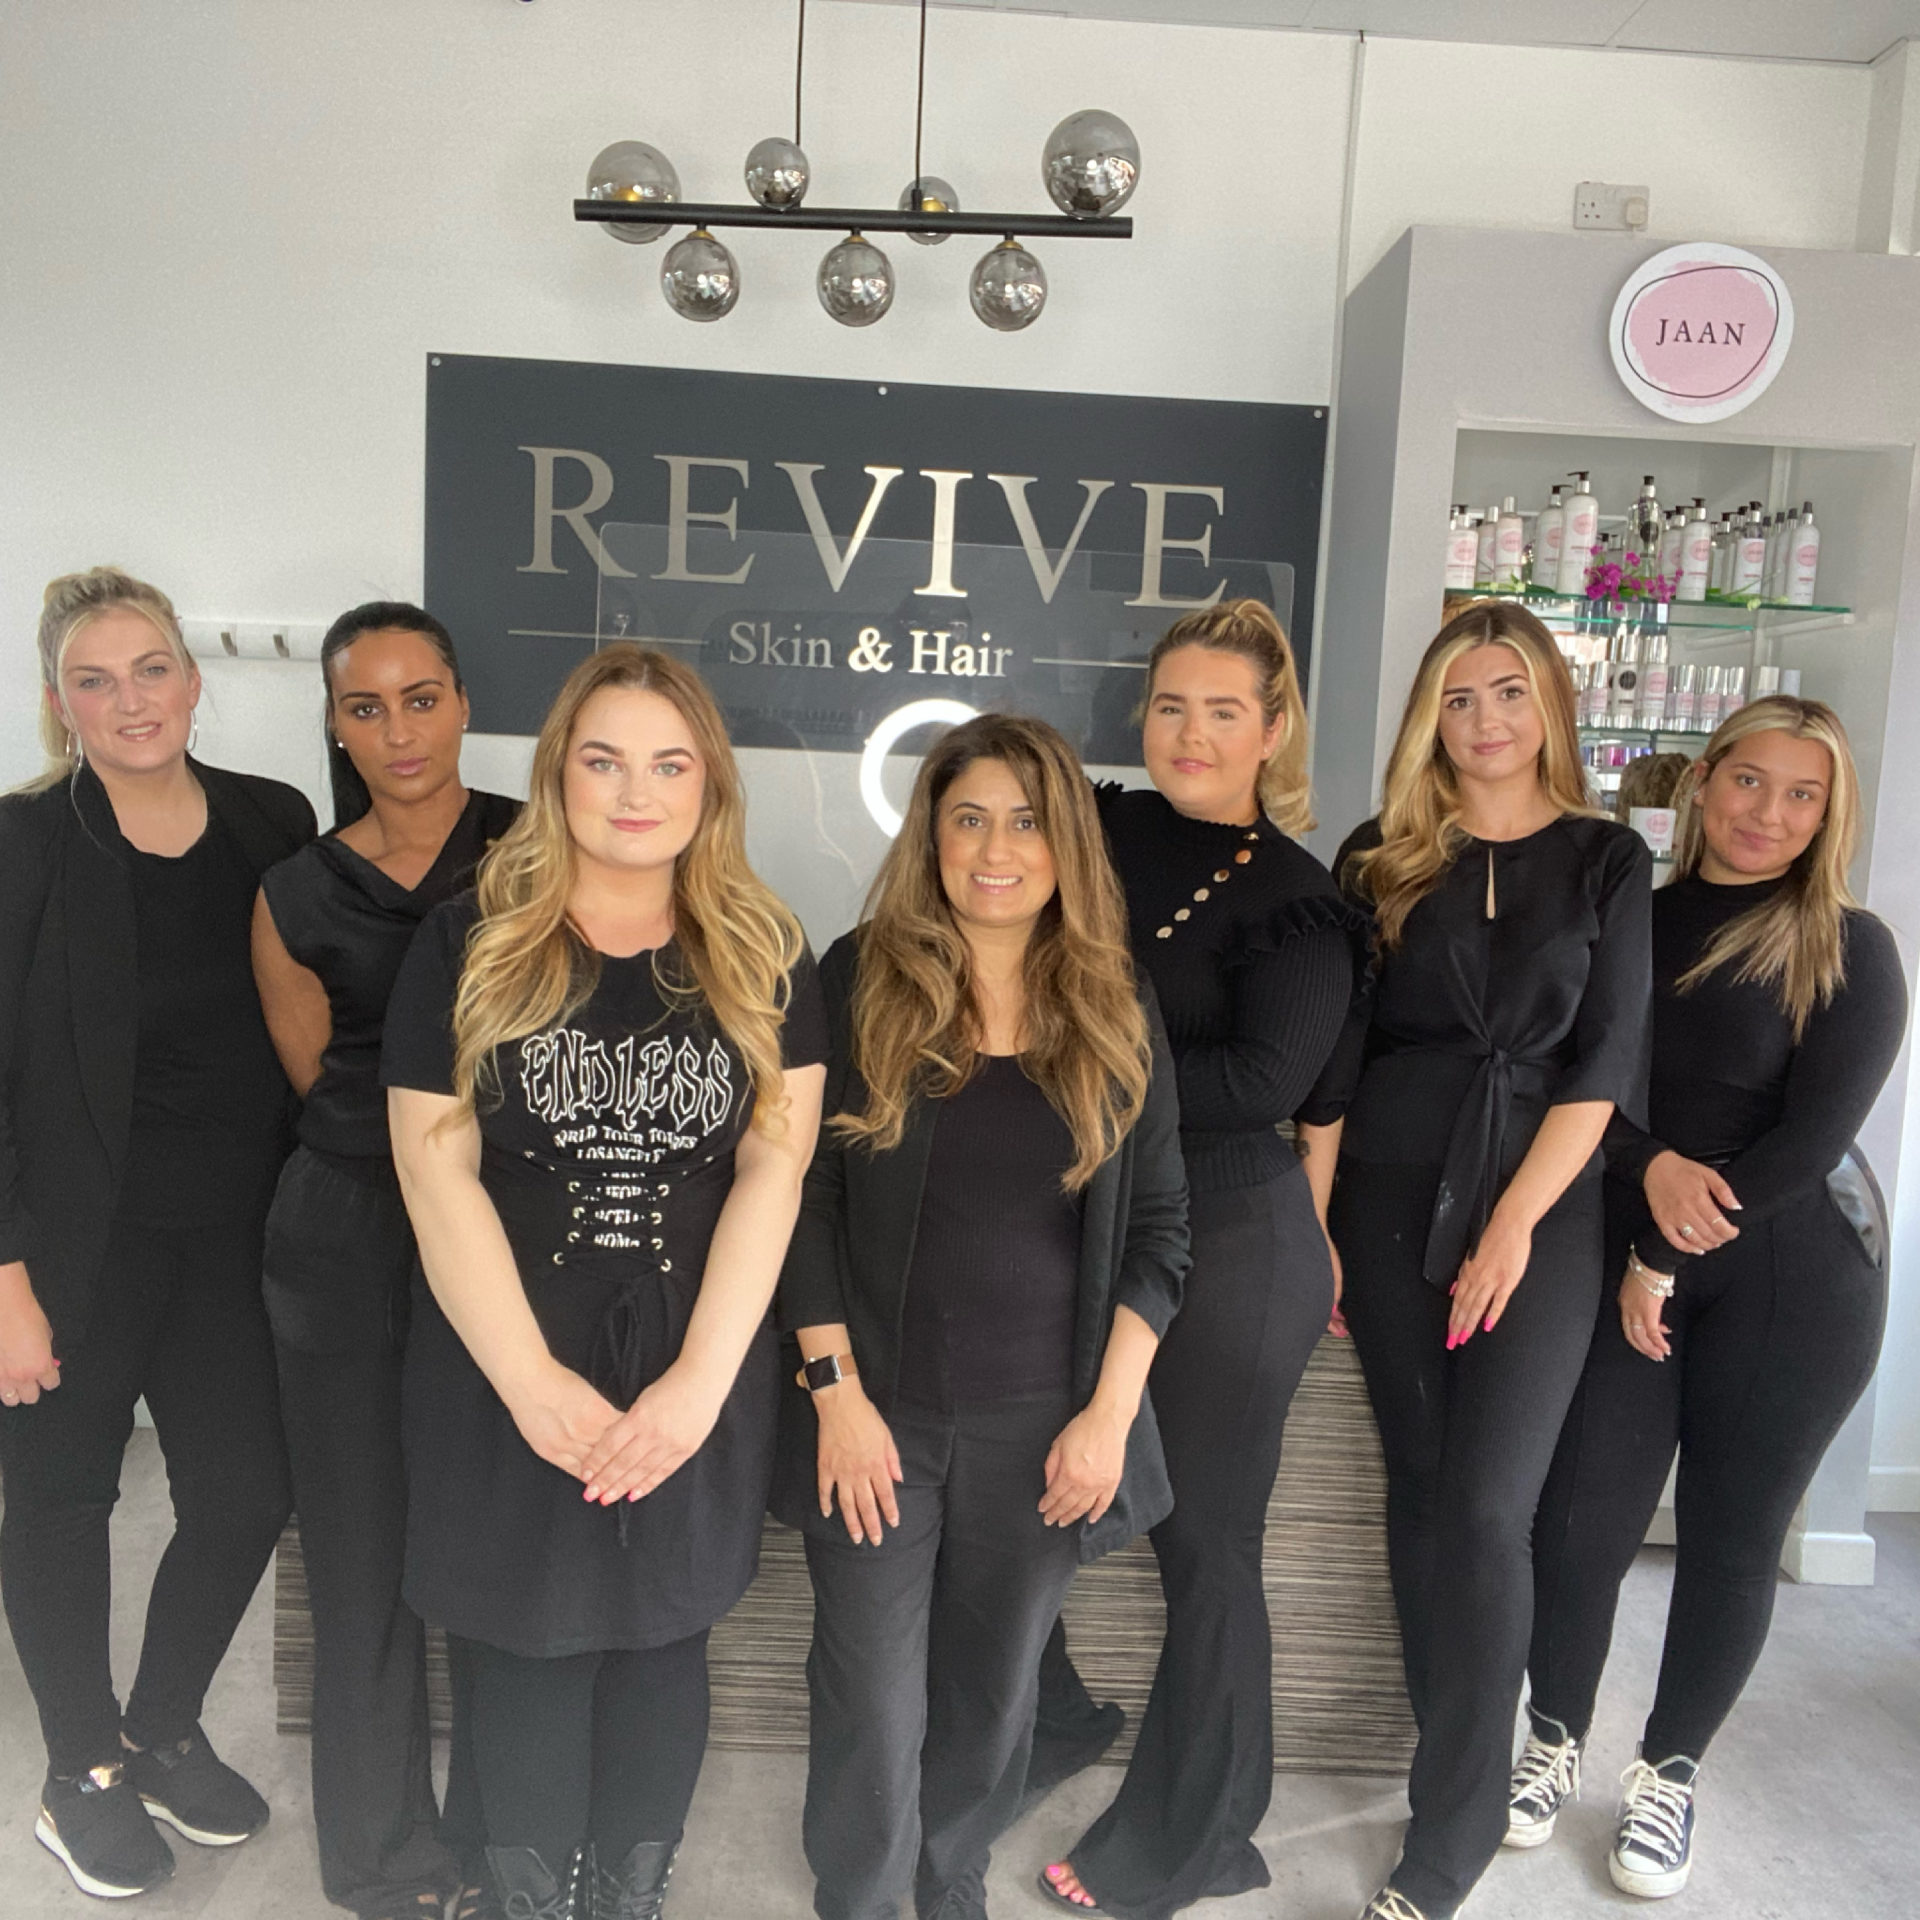 Revive hair, beauty & skin clinic in Altrincham, Cheshire